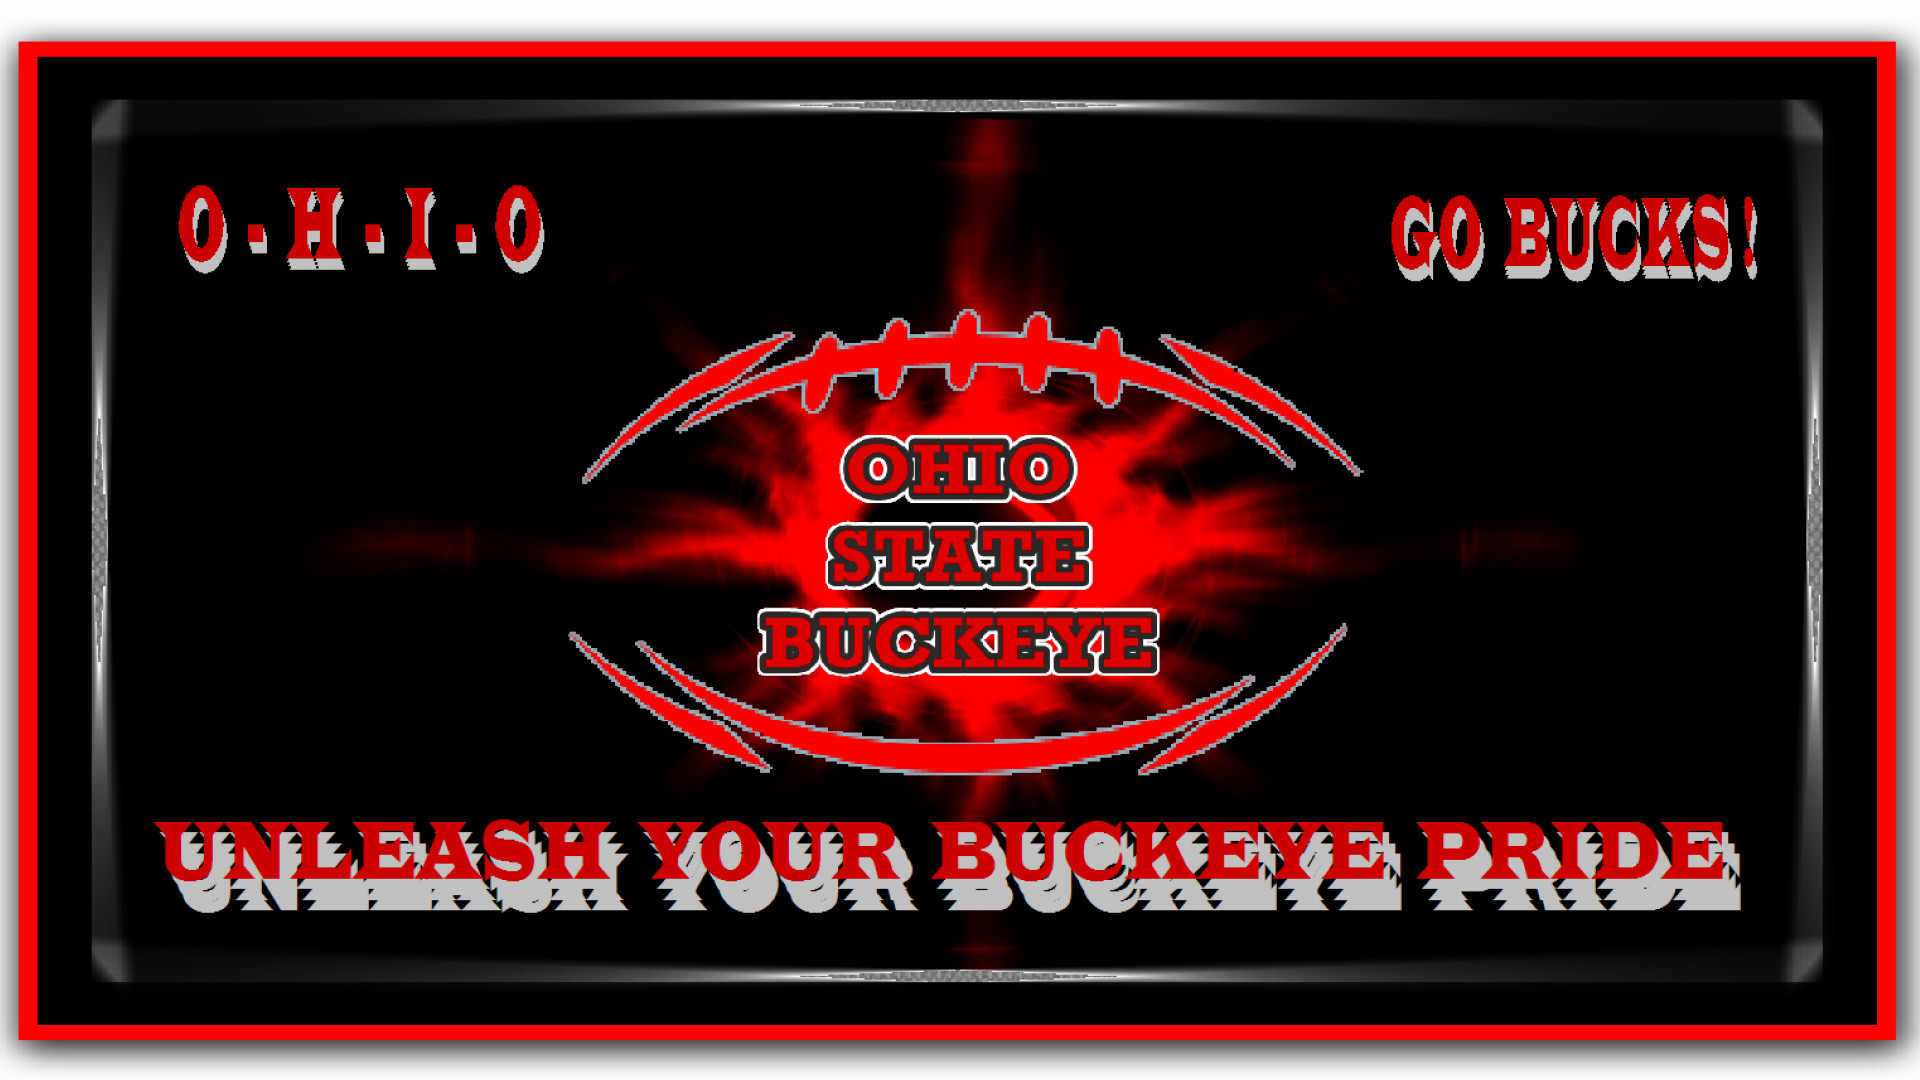 1920x1080 Ohio State Live Wallpaper HD Android Apps on Google Play